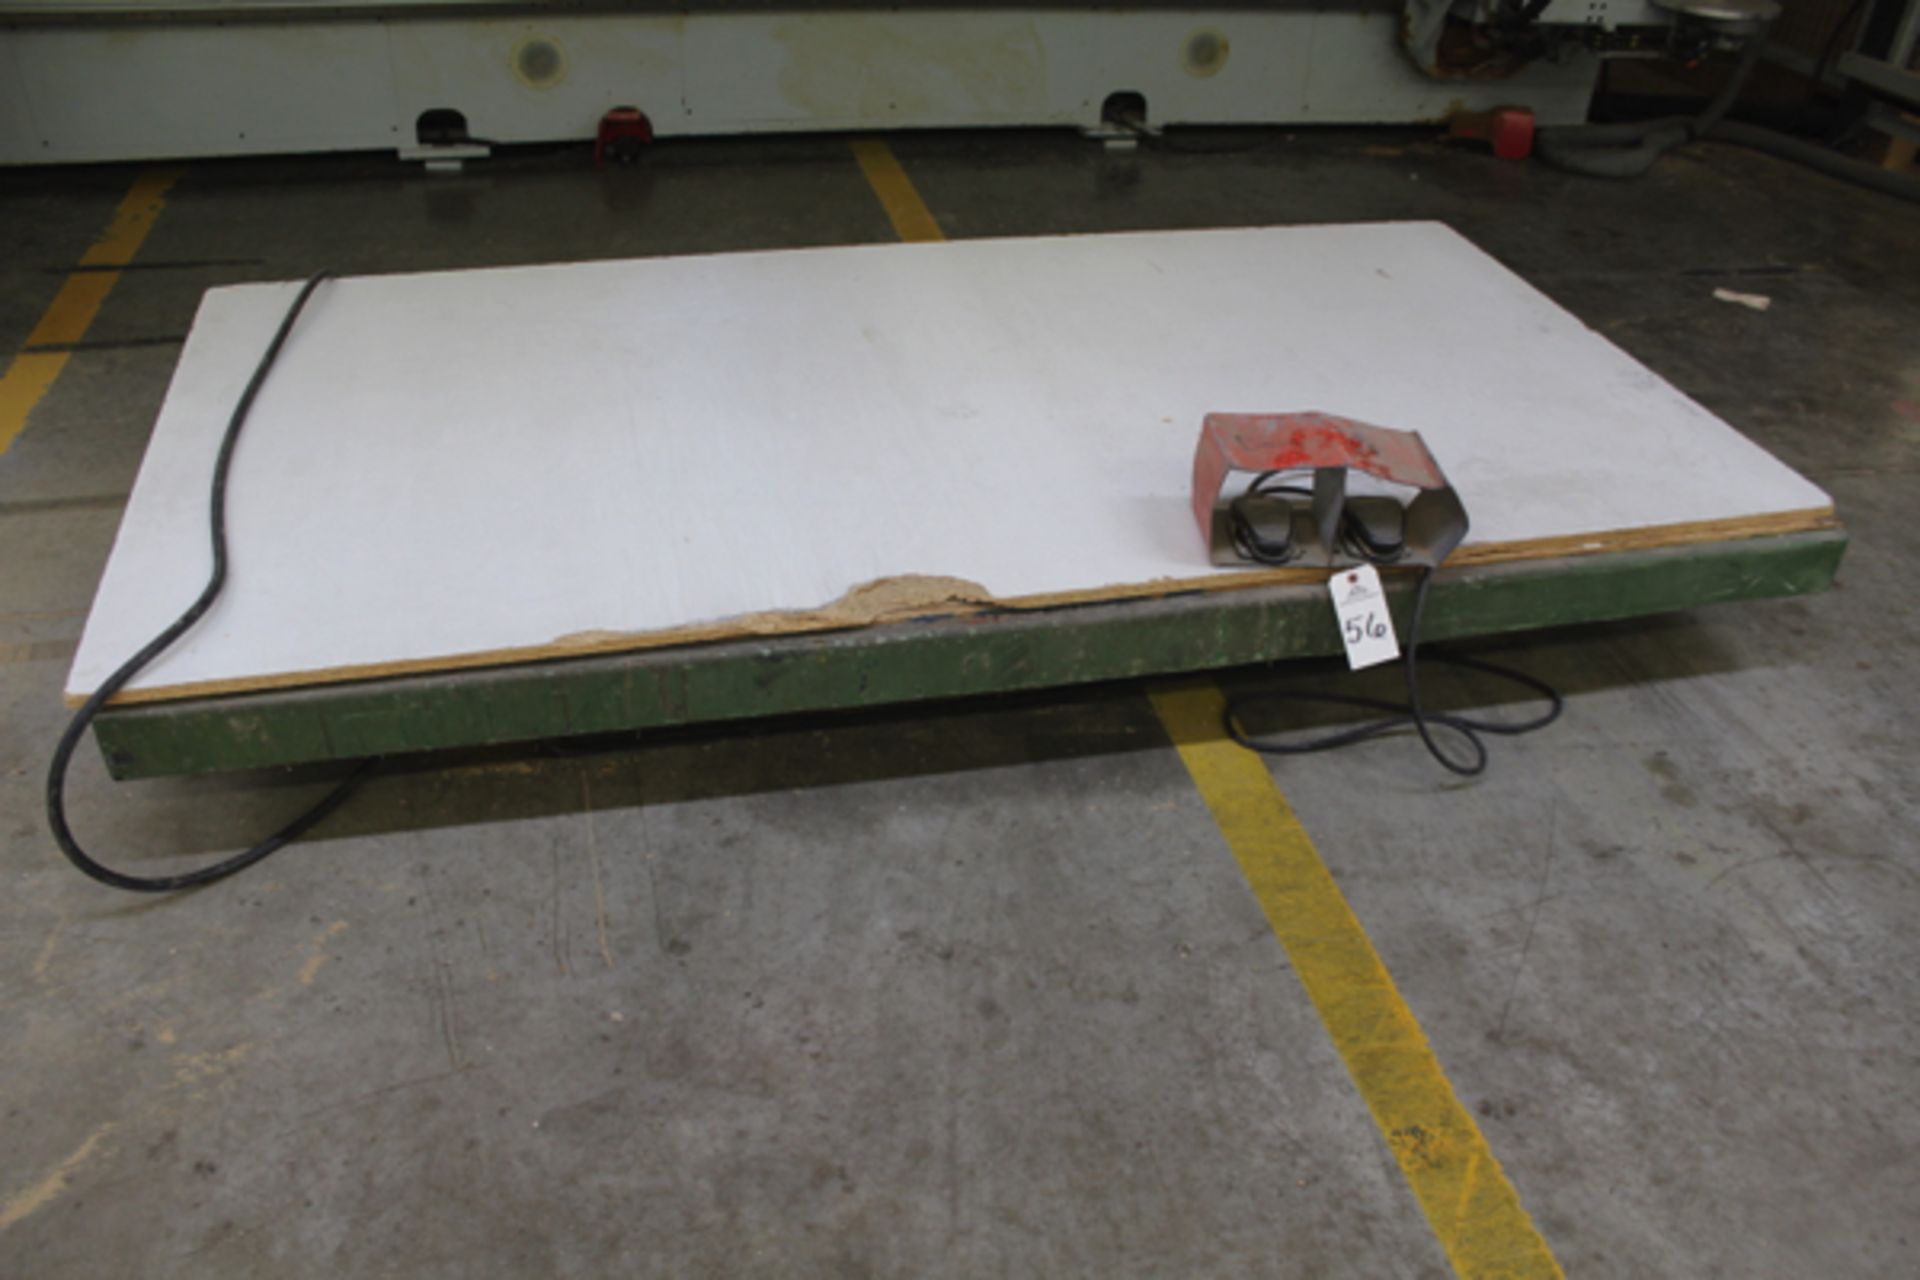 4' X 8' Hydraulic Lift Table | Rigging Price: $150